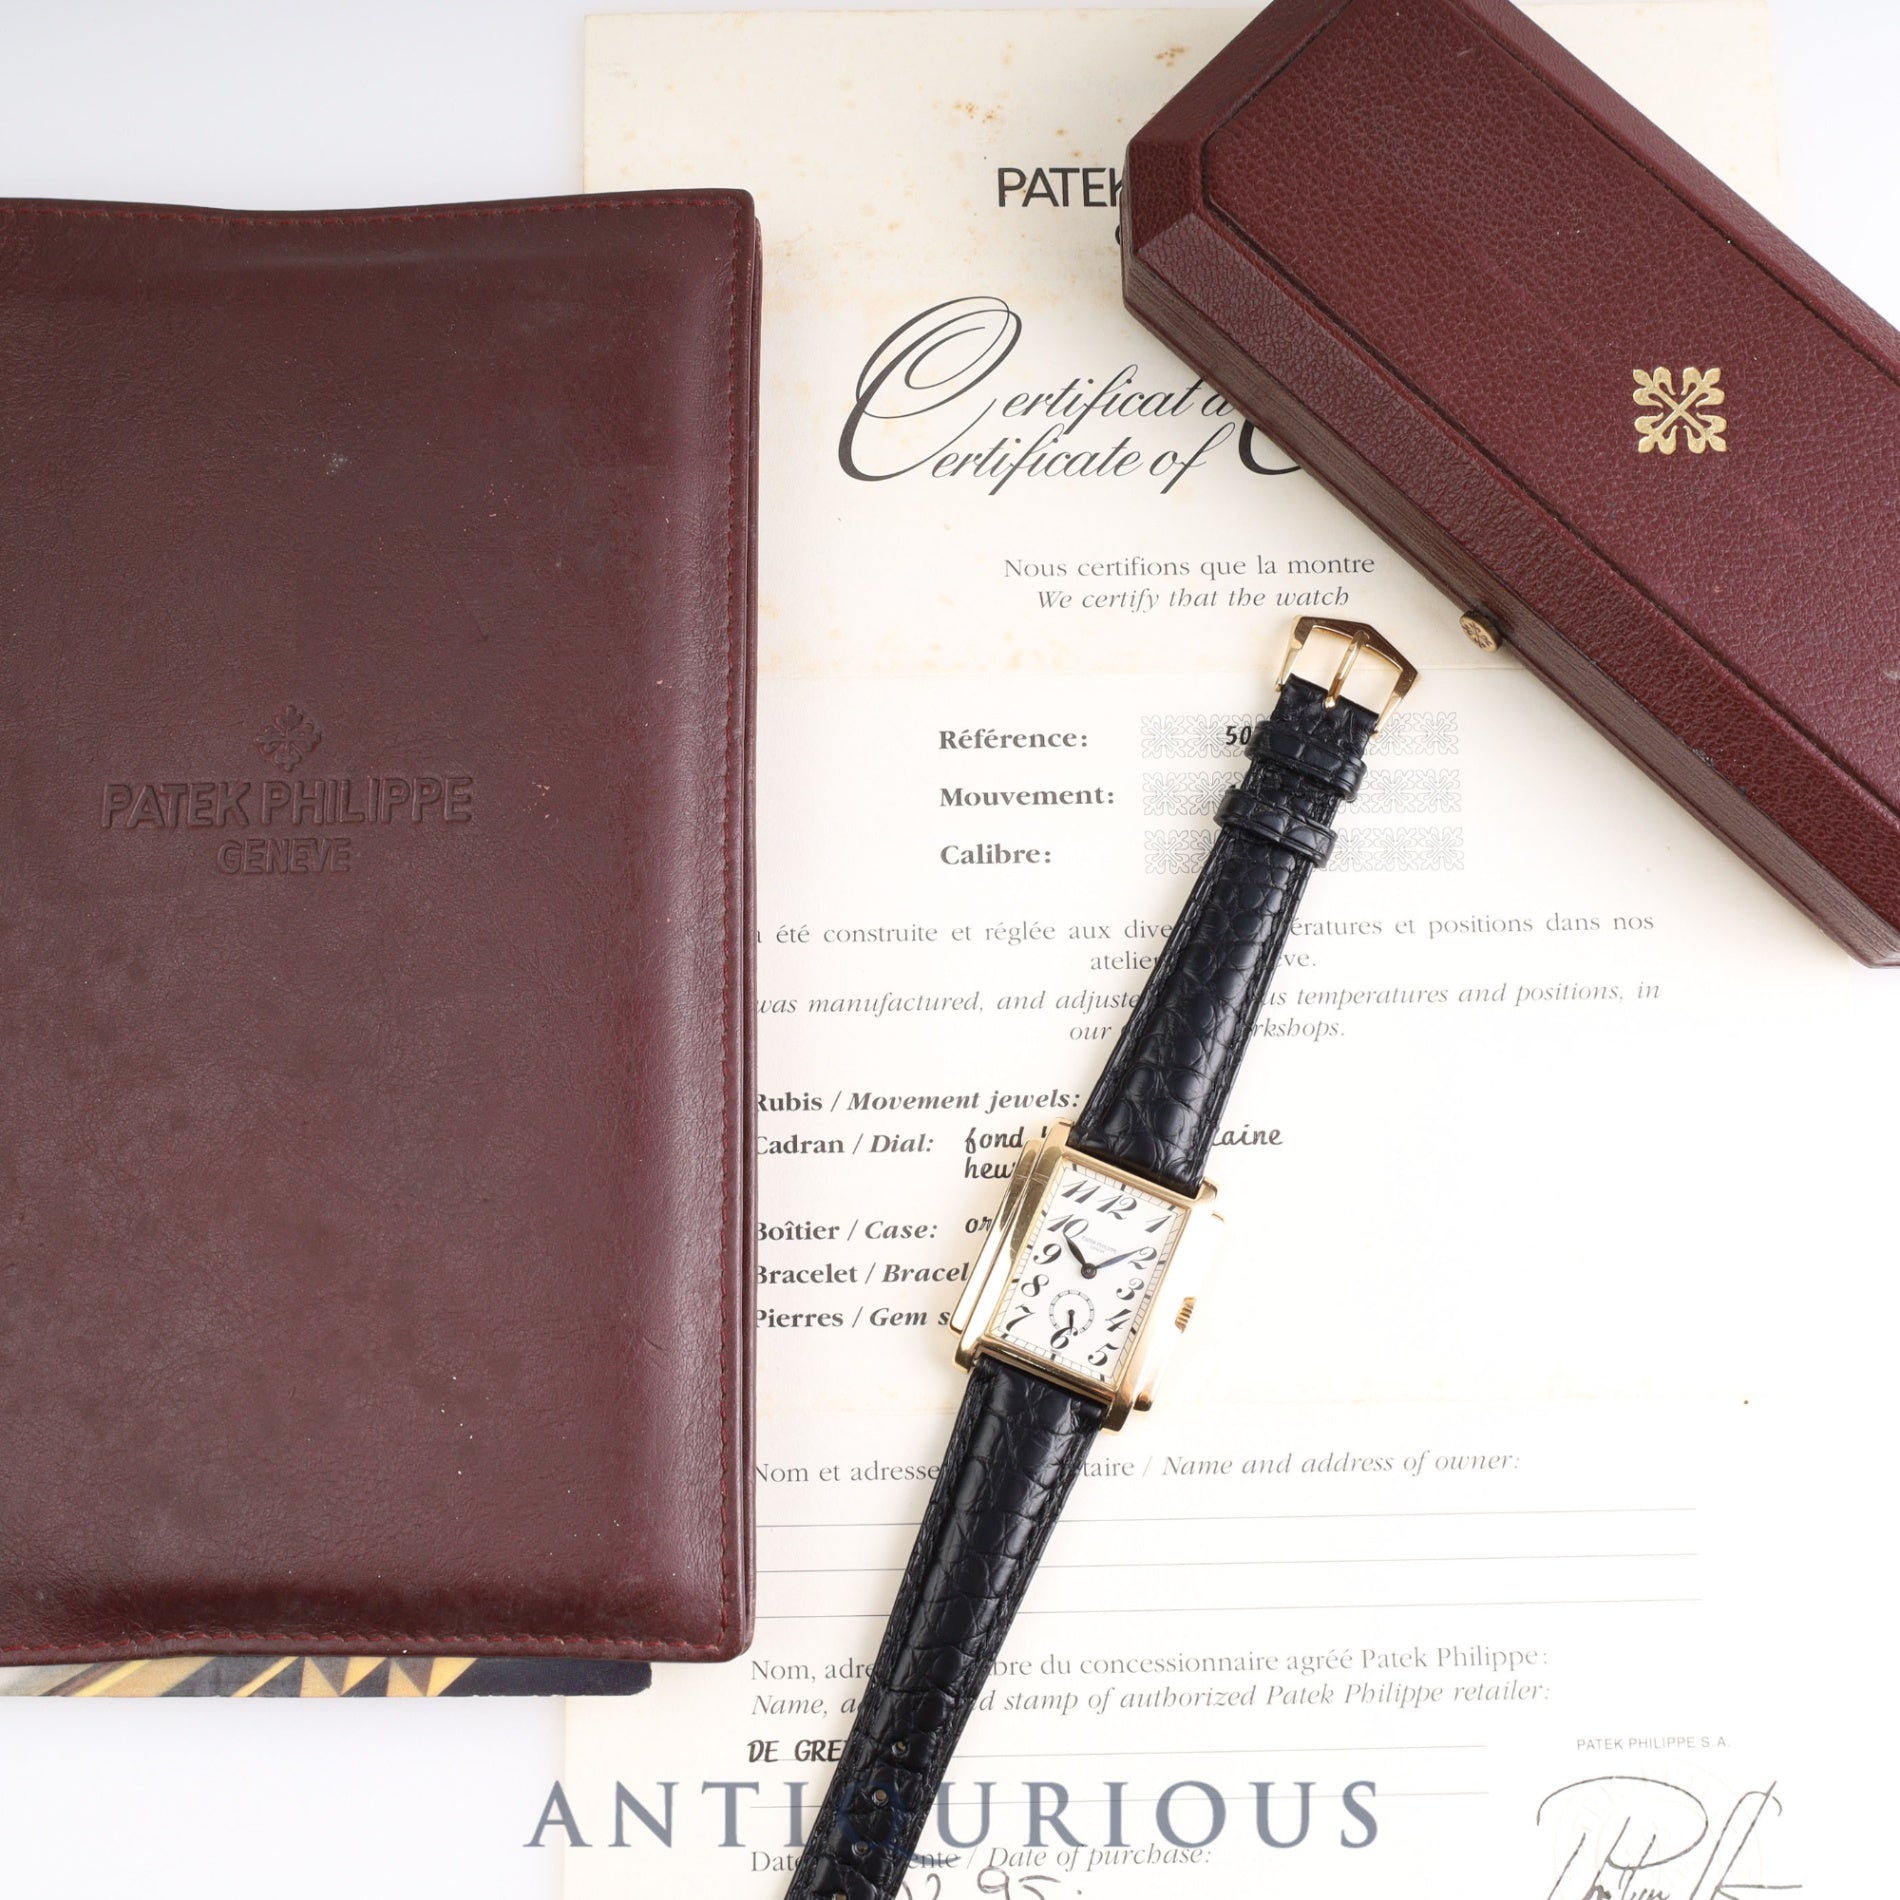 PATEK・PHILIPPE GONDOLO 5024J Manual winding Cal.215 YG Leather White Arabic Dial Box Protected (1995) Booklet